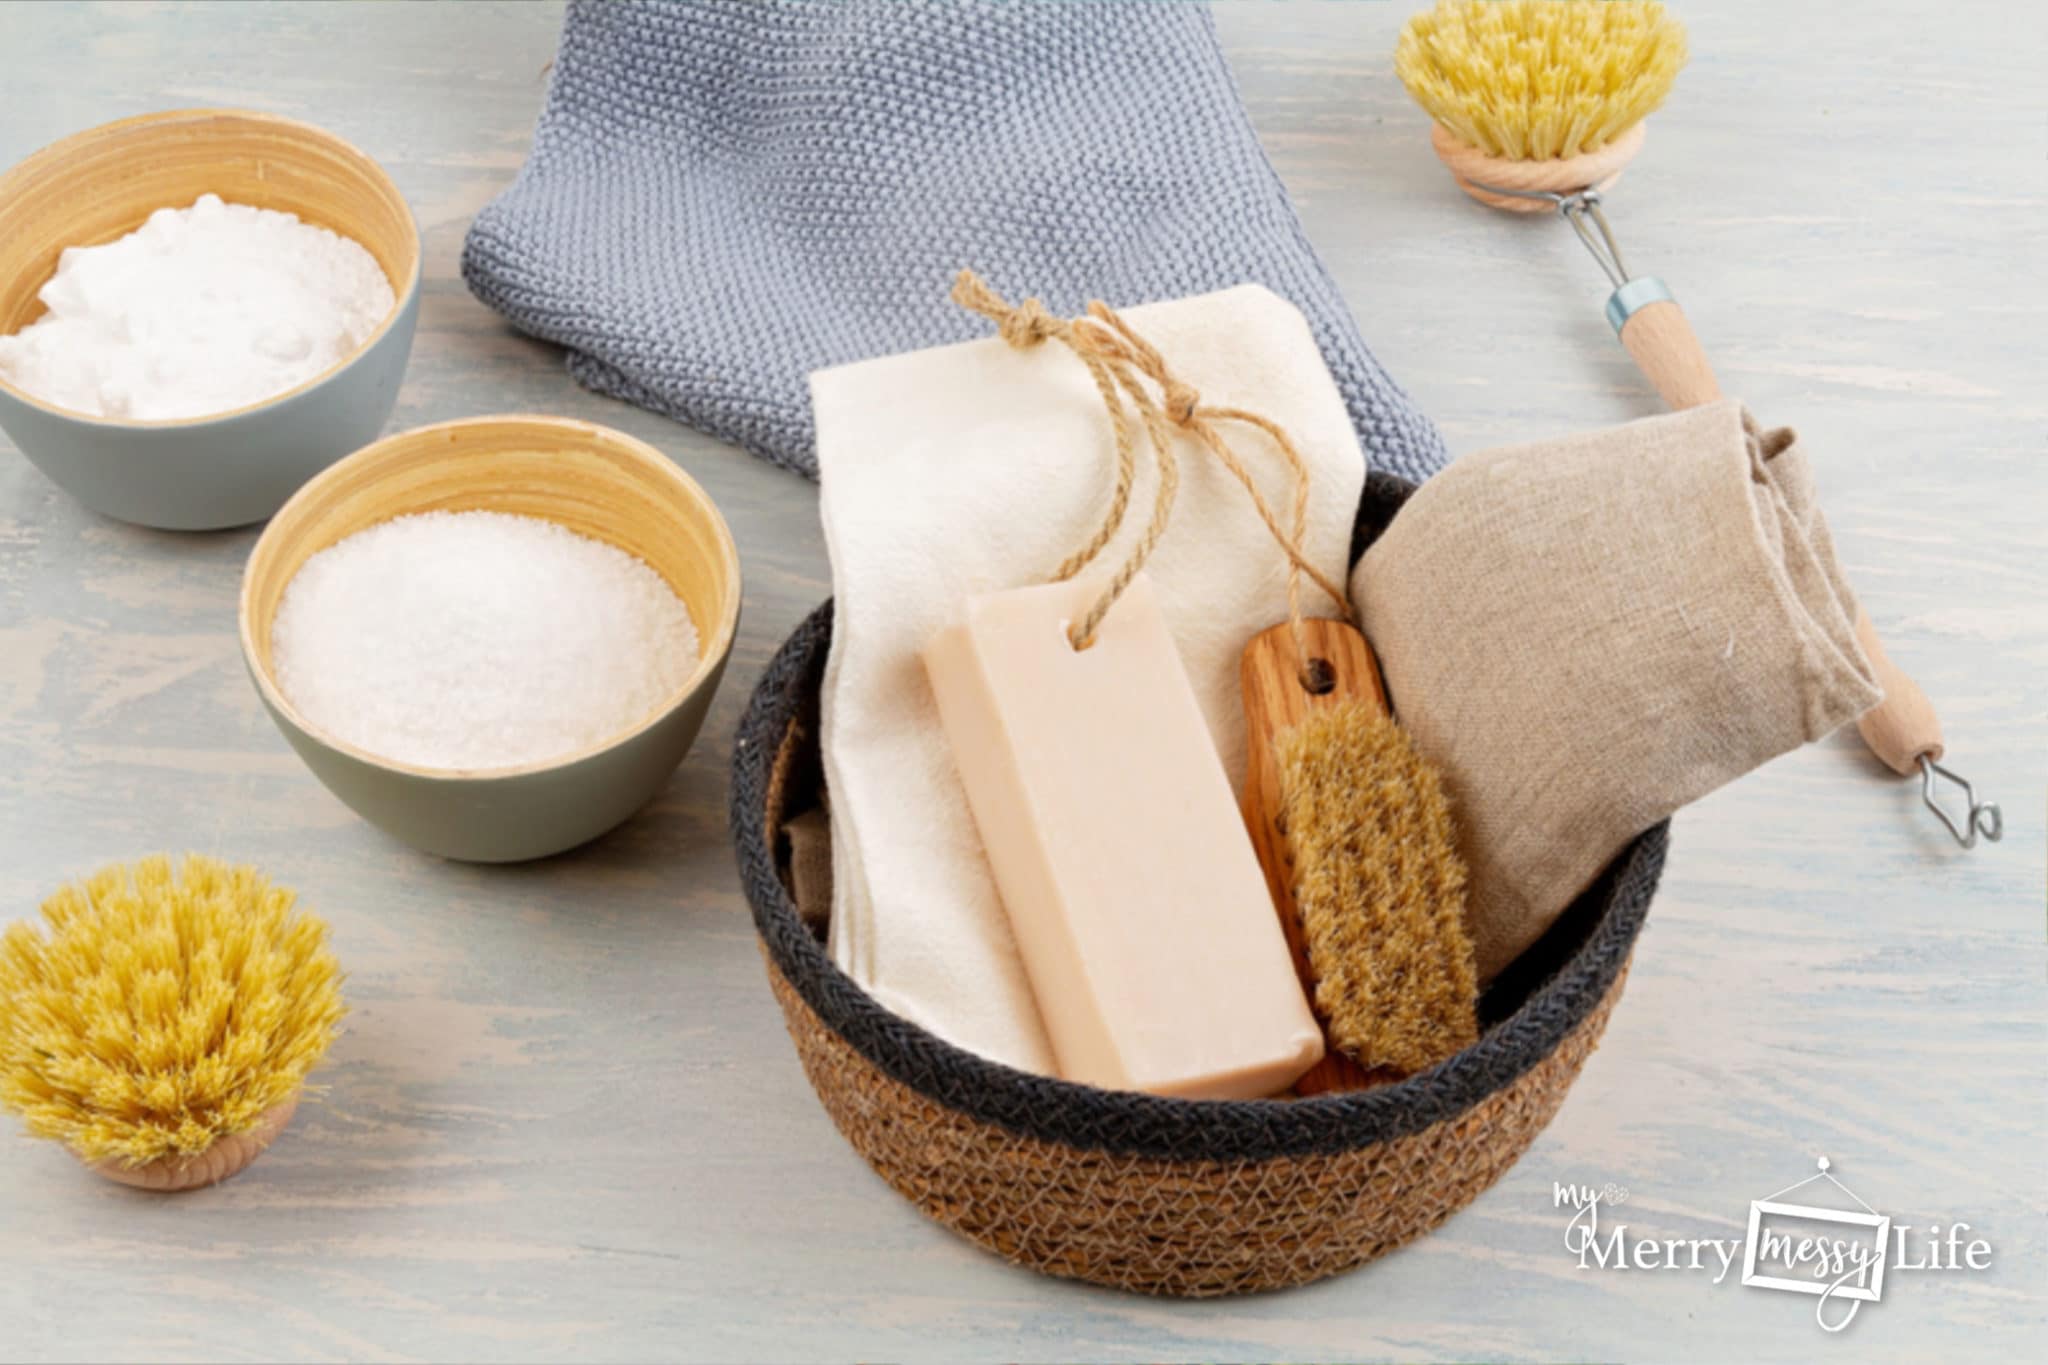 5 Reasons to Go Natural In Your Home